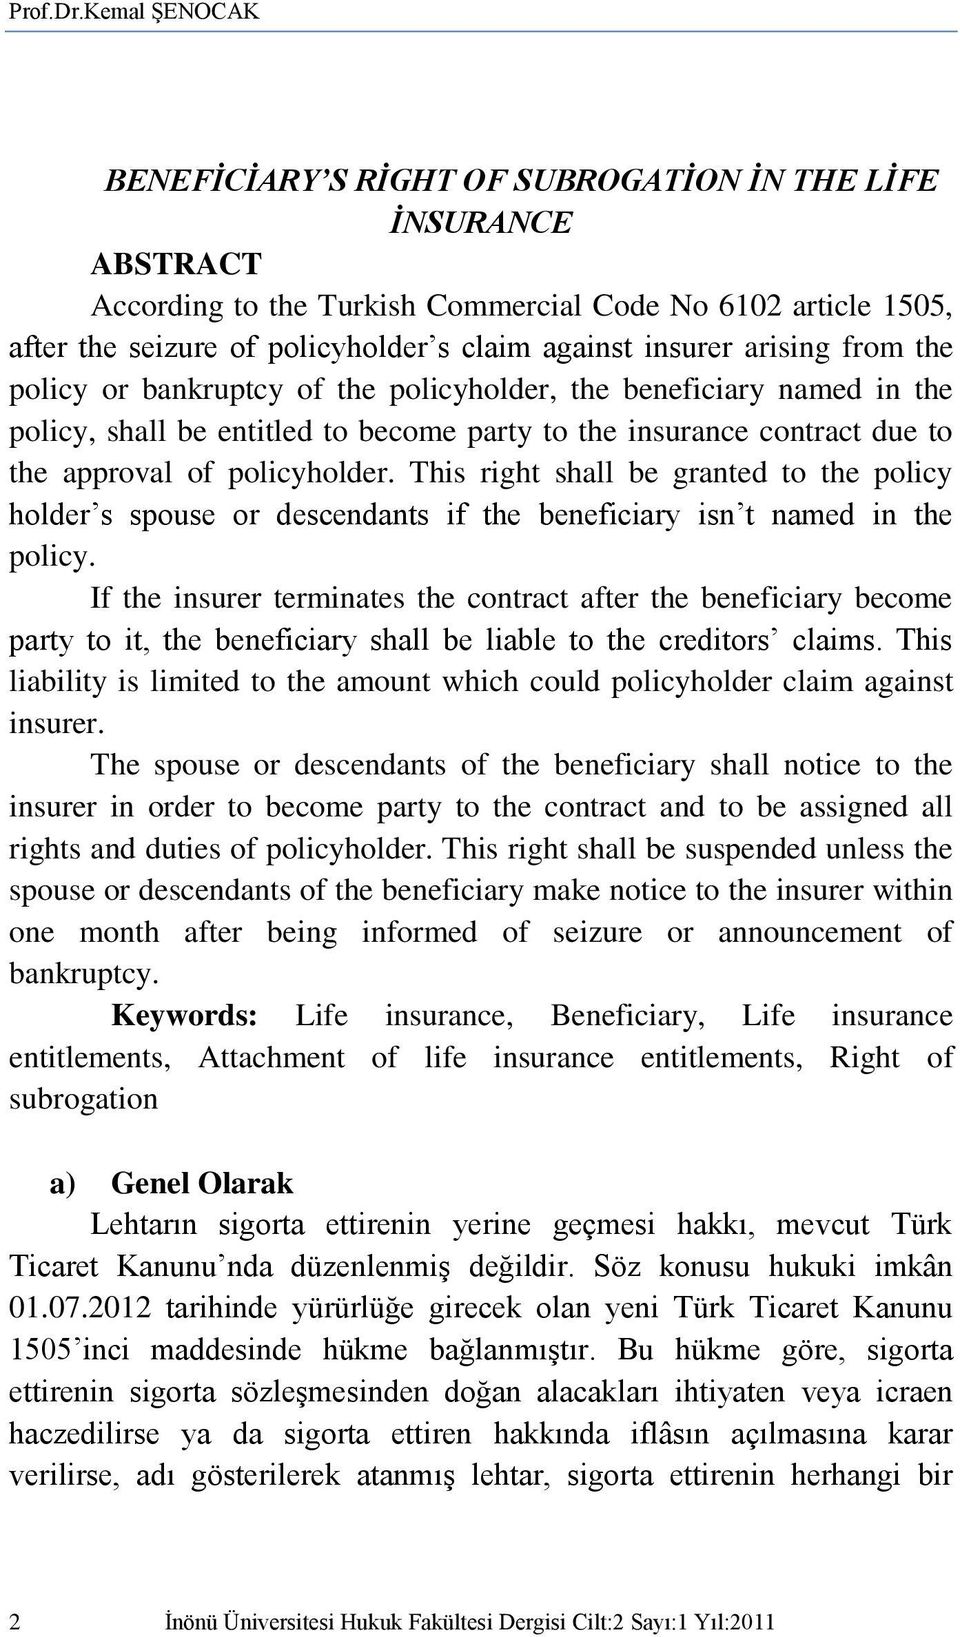 insurer arising from the policy or bankruptcy of the policyholder, the beneficiary named in the policy, shall be entitled to become party to the insurance contract due to the approval of policyholder.